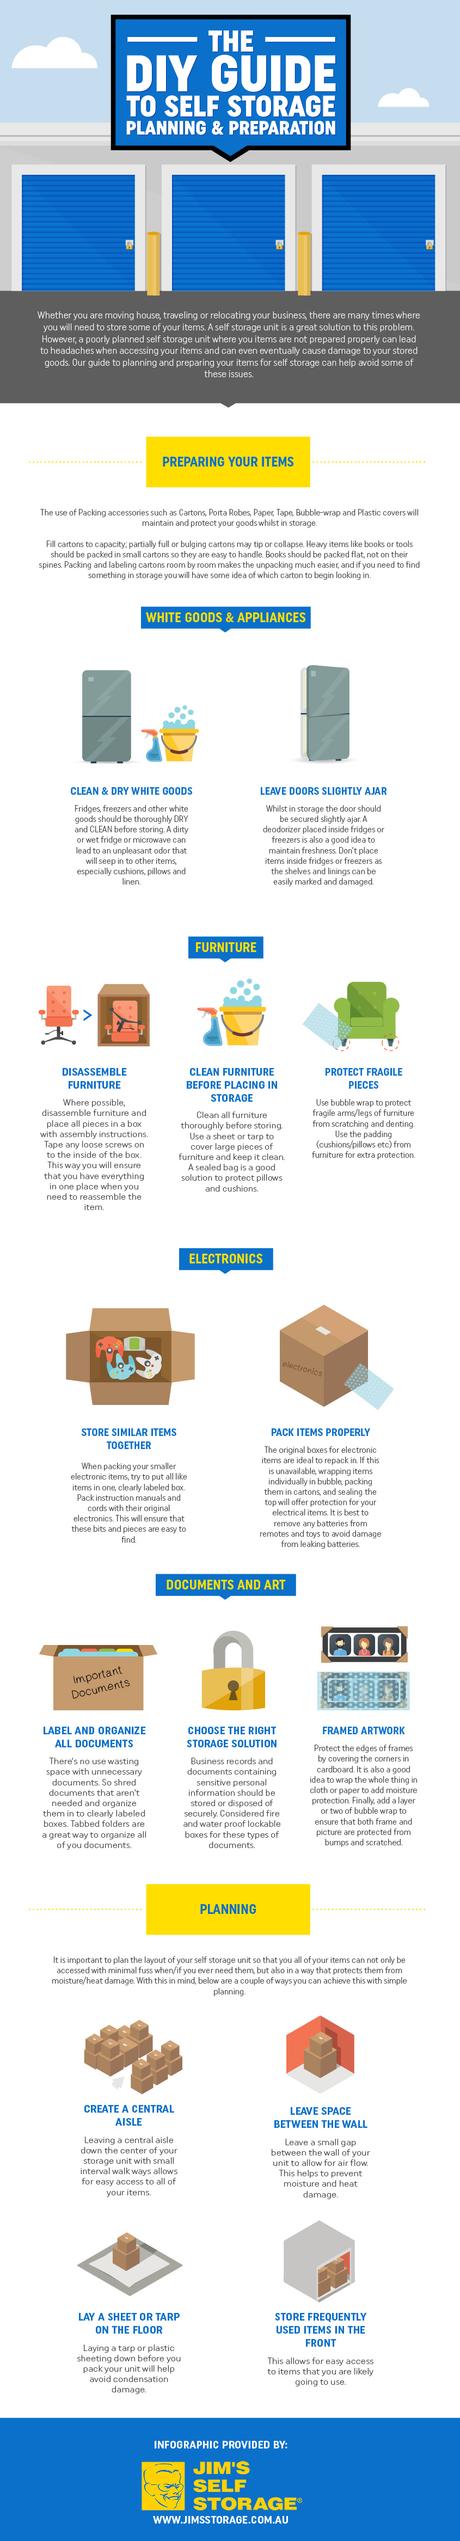 Guide To Storing Goods In Self Storage Infographic